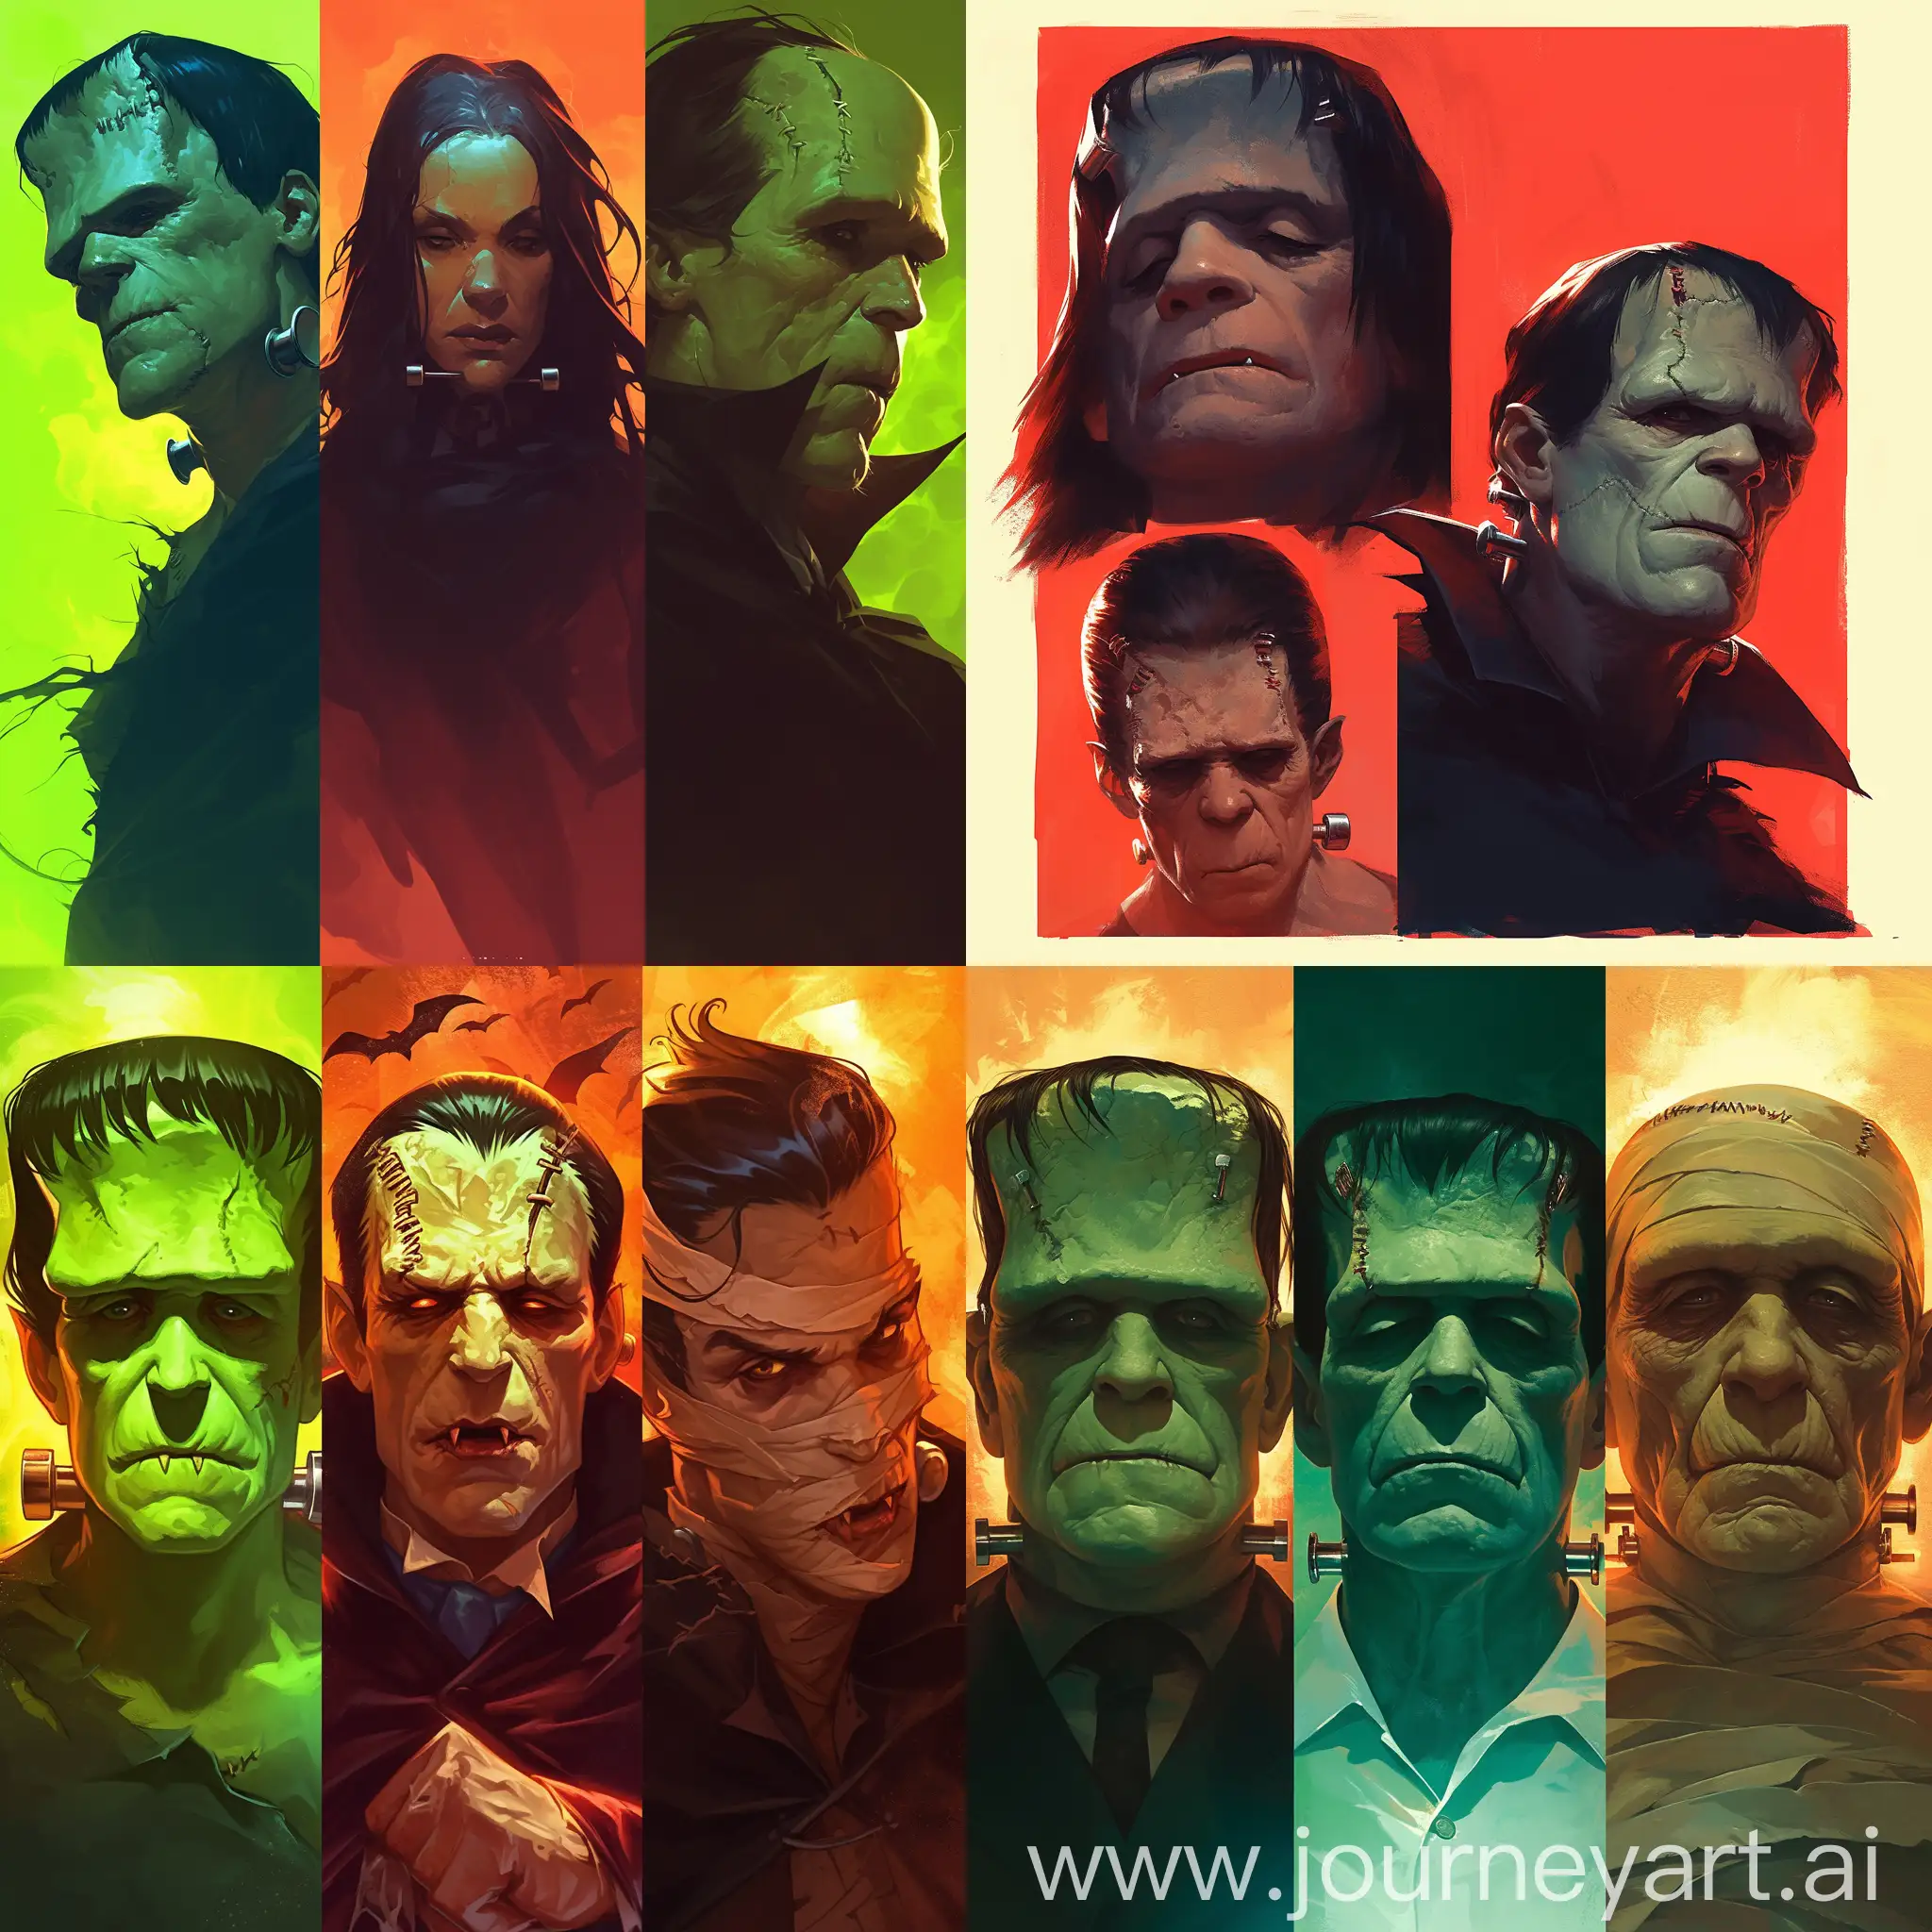 Classic-Monster-Portraits-Frankenstein-Dracula-and-Mummy-Illustrations